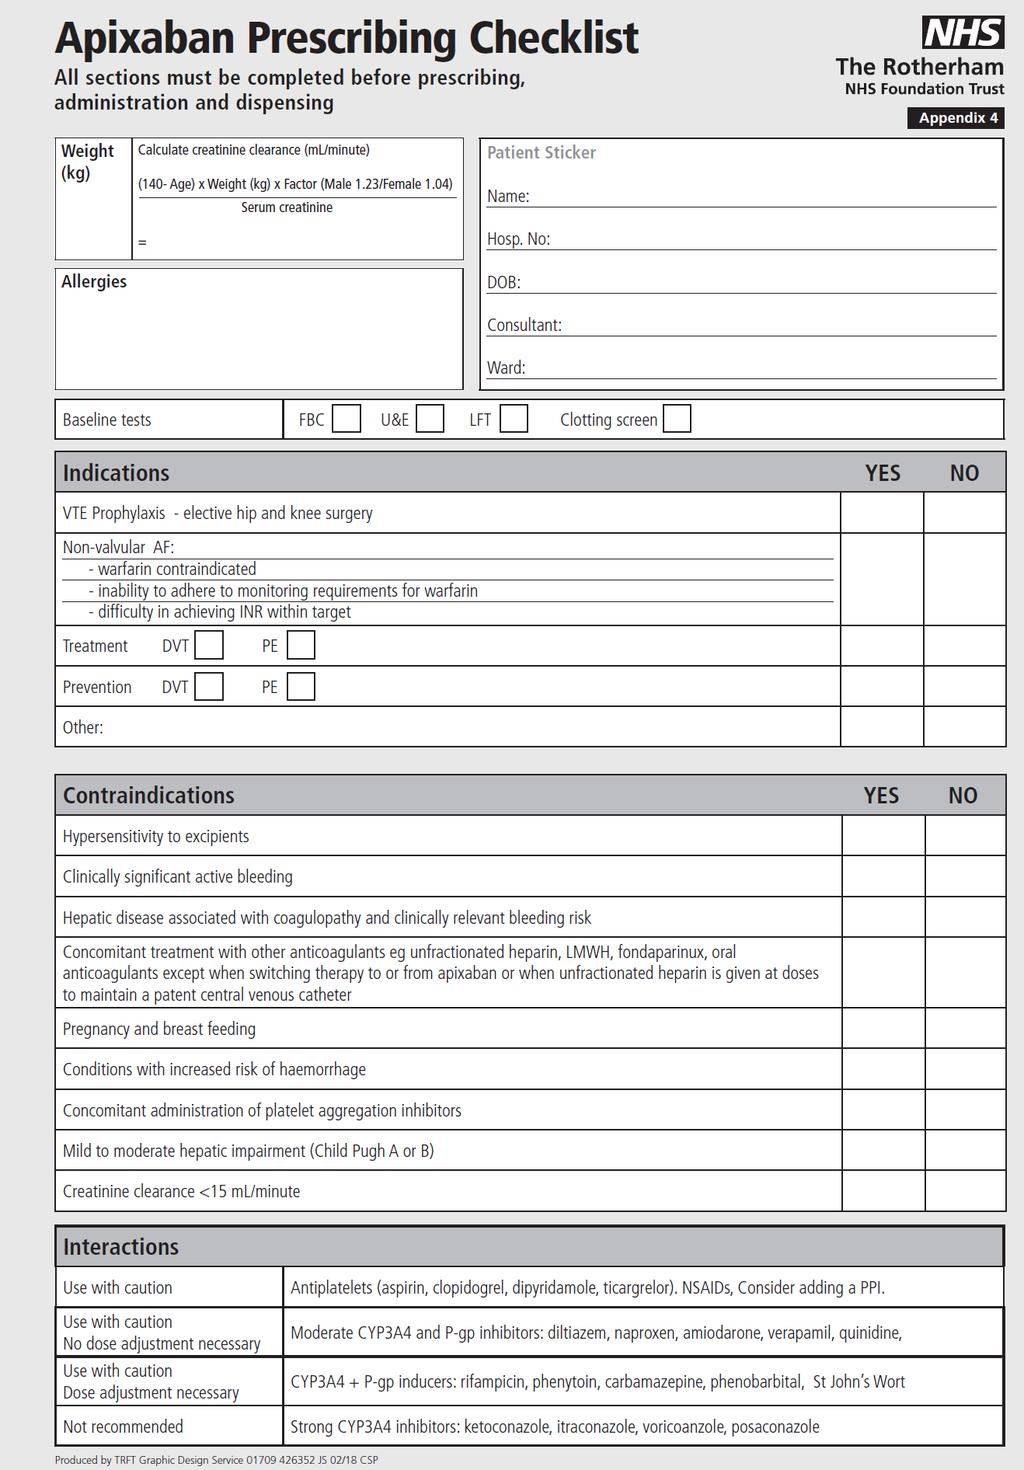 APPENDIX 4 Do not use or copy this example an original version of this form is available at